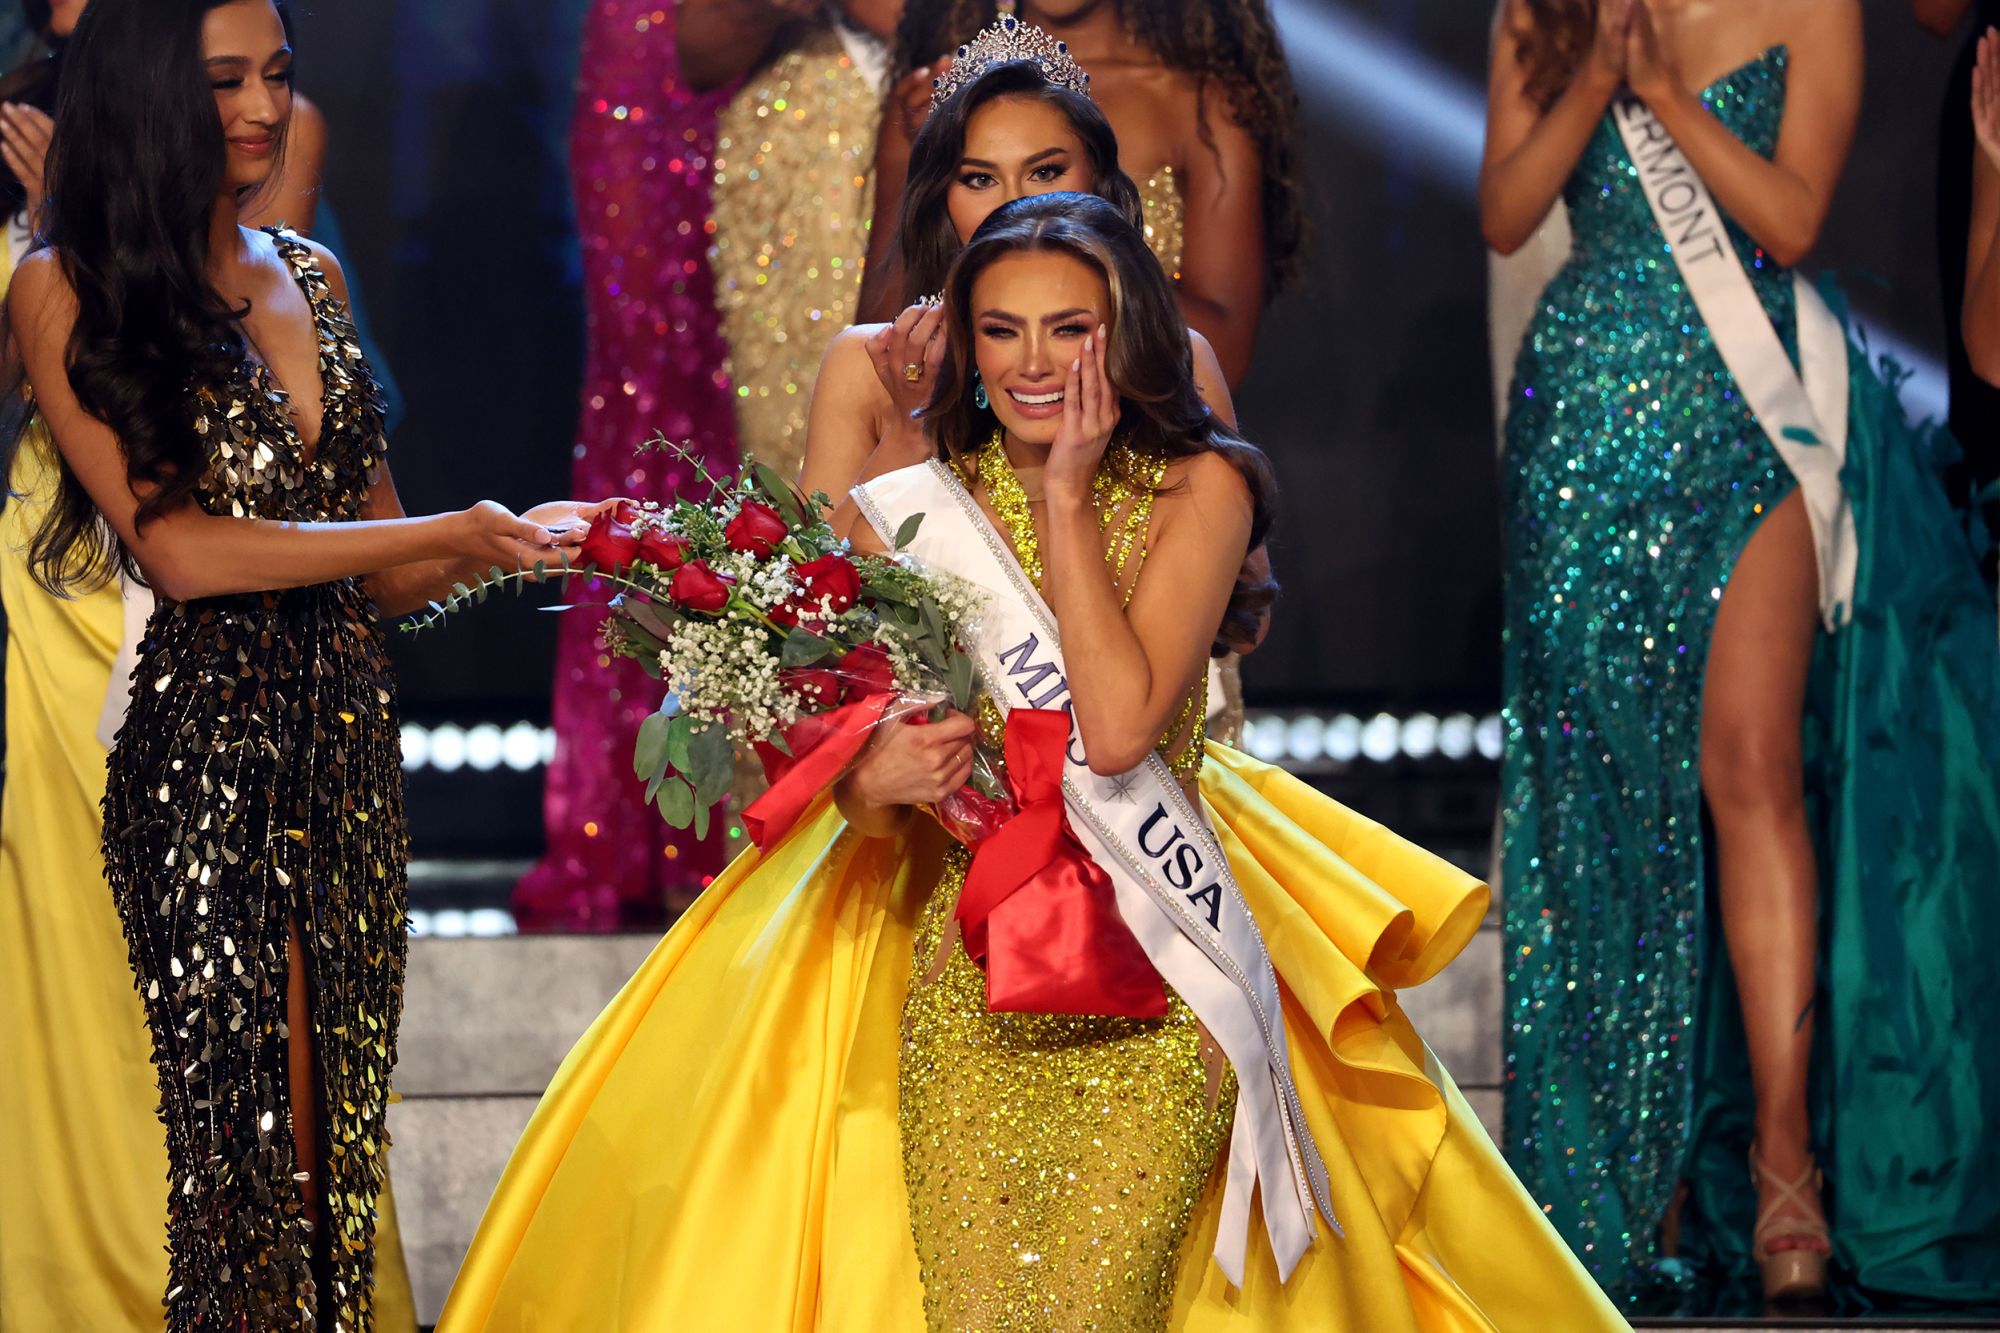 Photos of the Women Competing to Be the Next Miss Universe